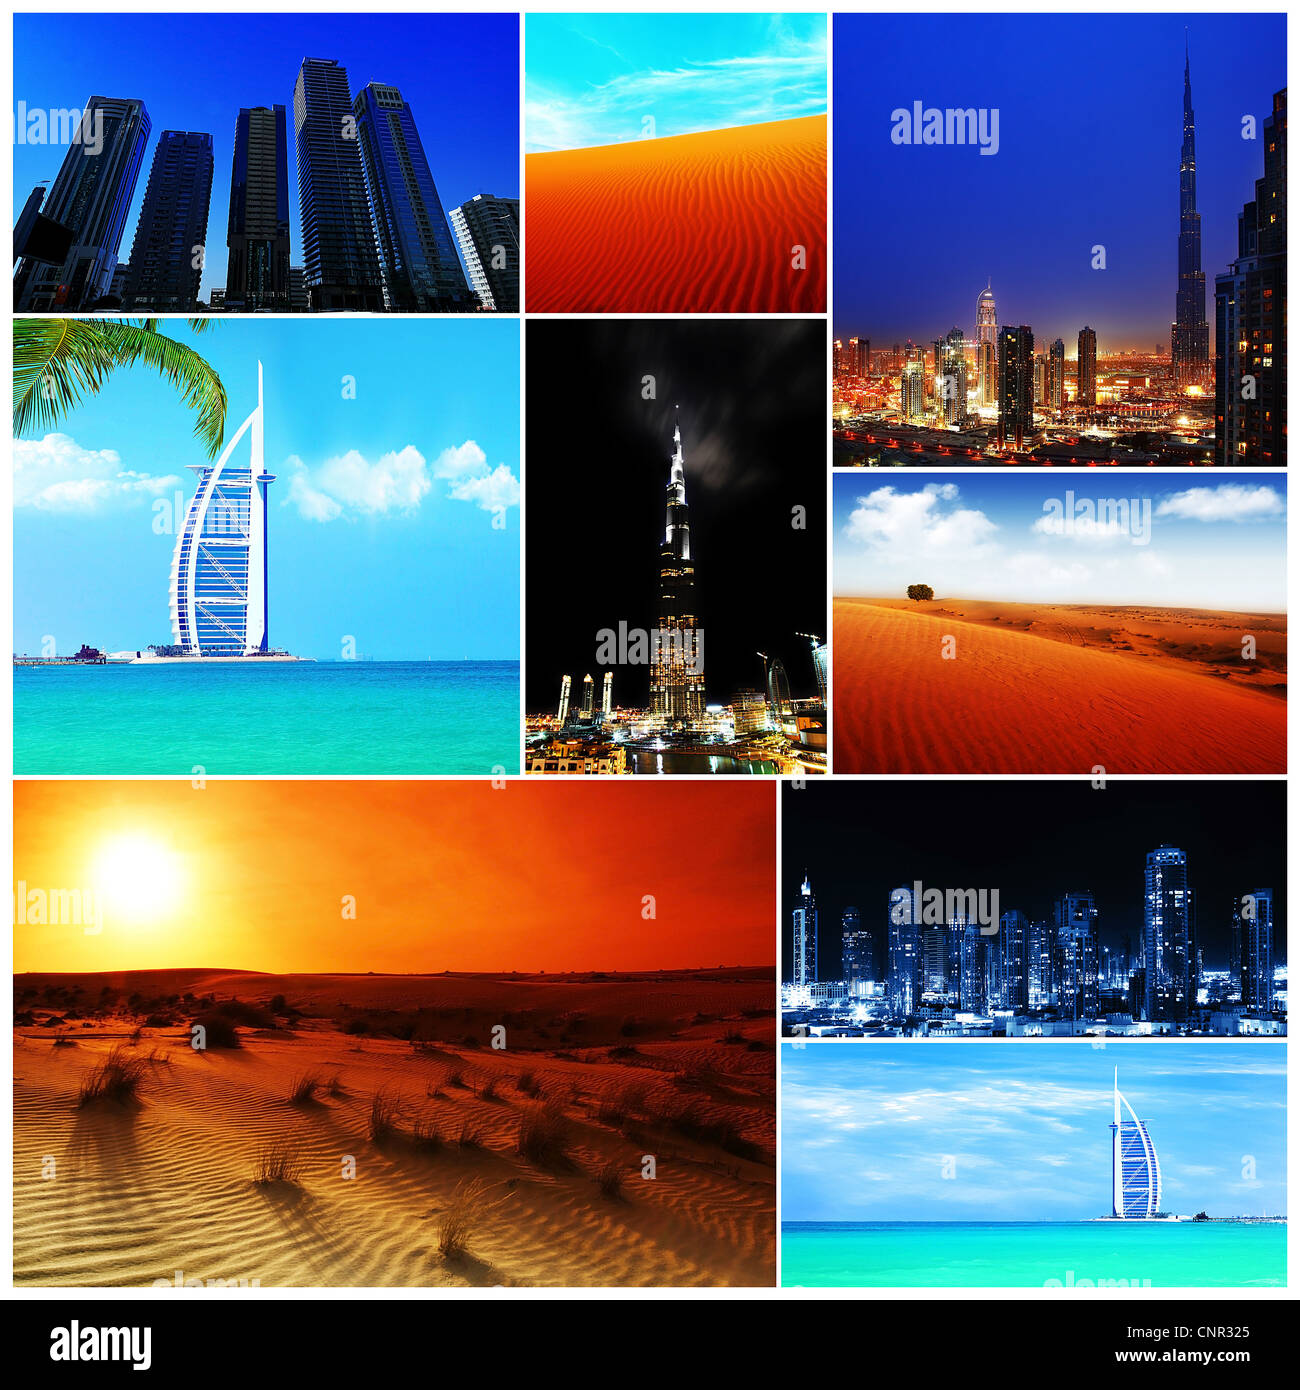 Collage of United Arab Emirates images, from wild nature to modern cities Stock Photo